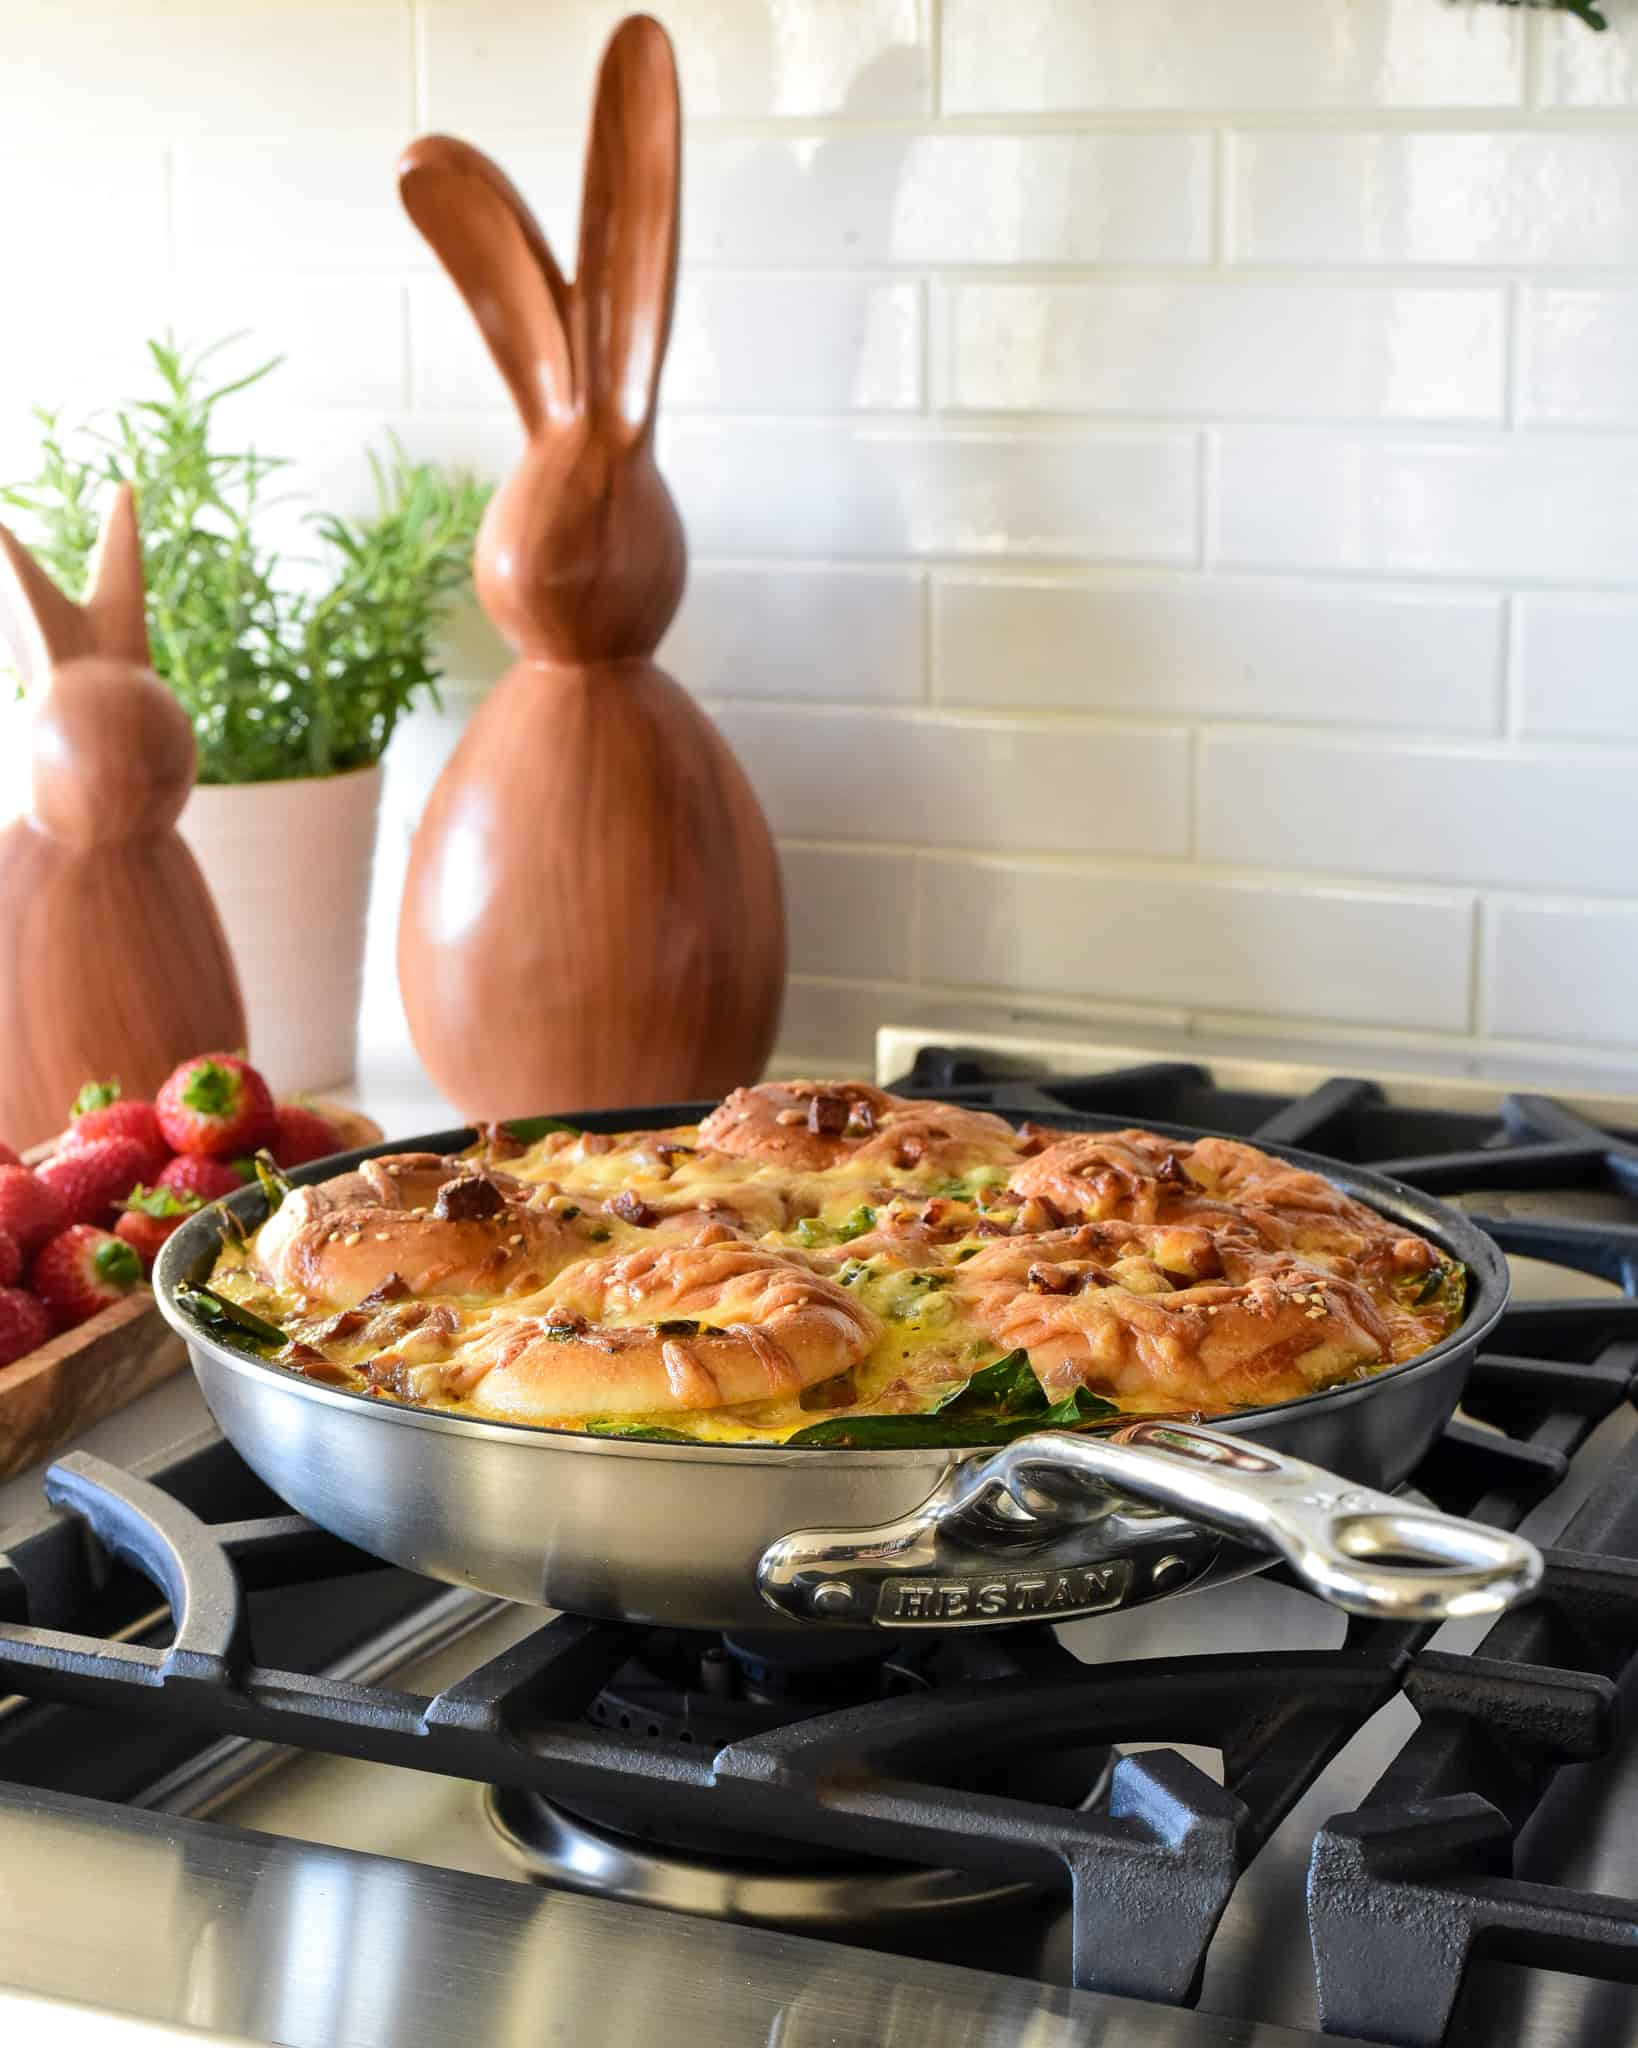 A skillet of a bagel bake on the oven with wooden Easter bunnies on the counter.